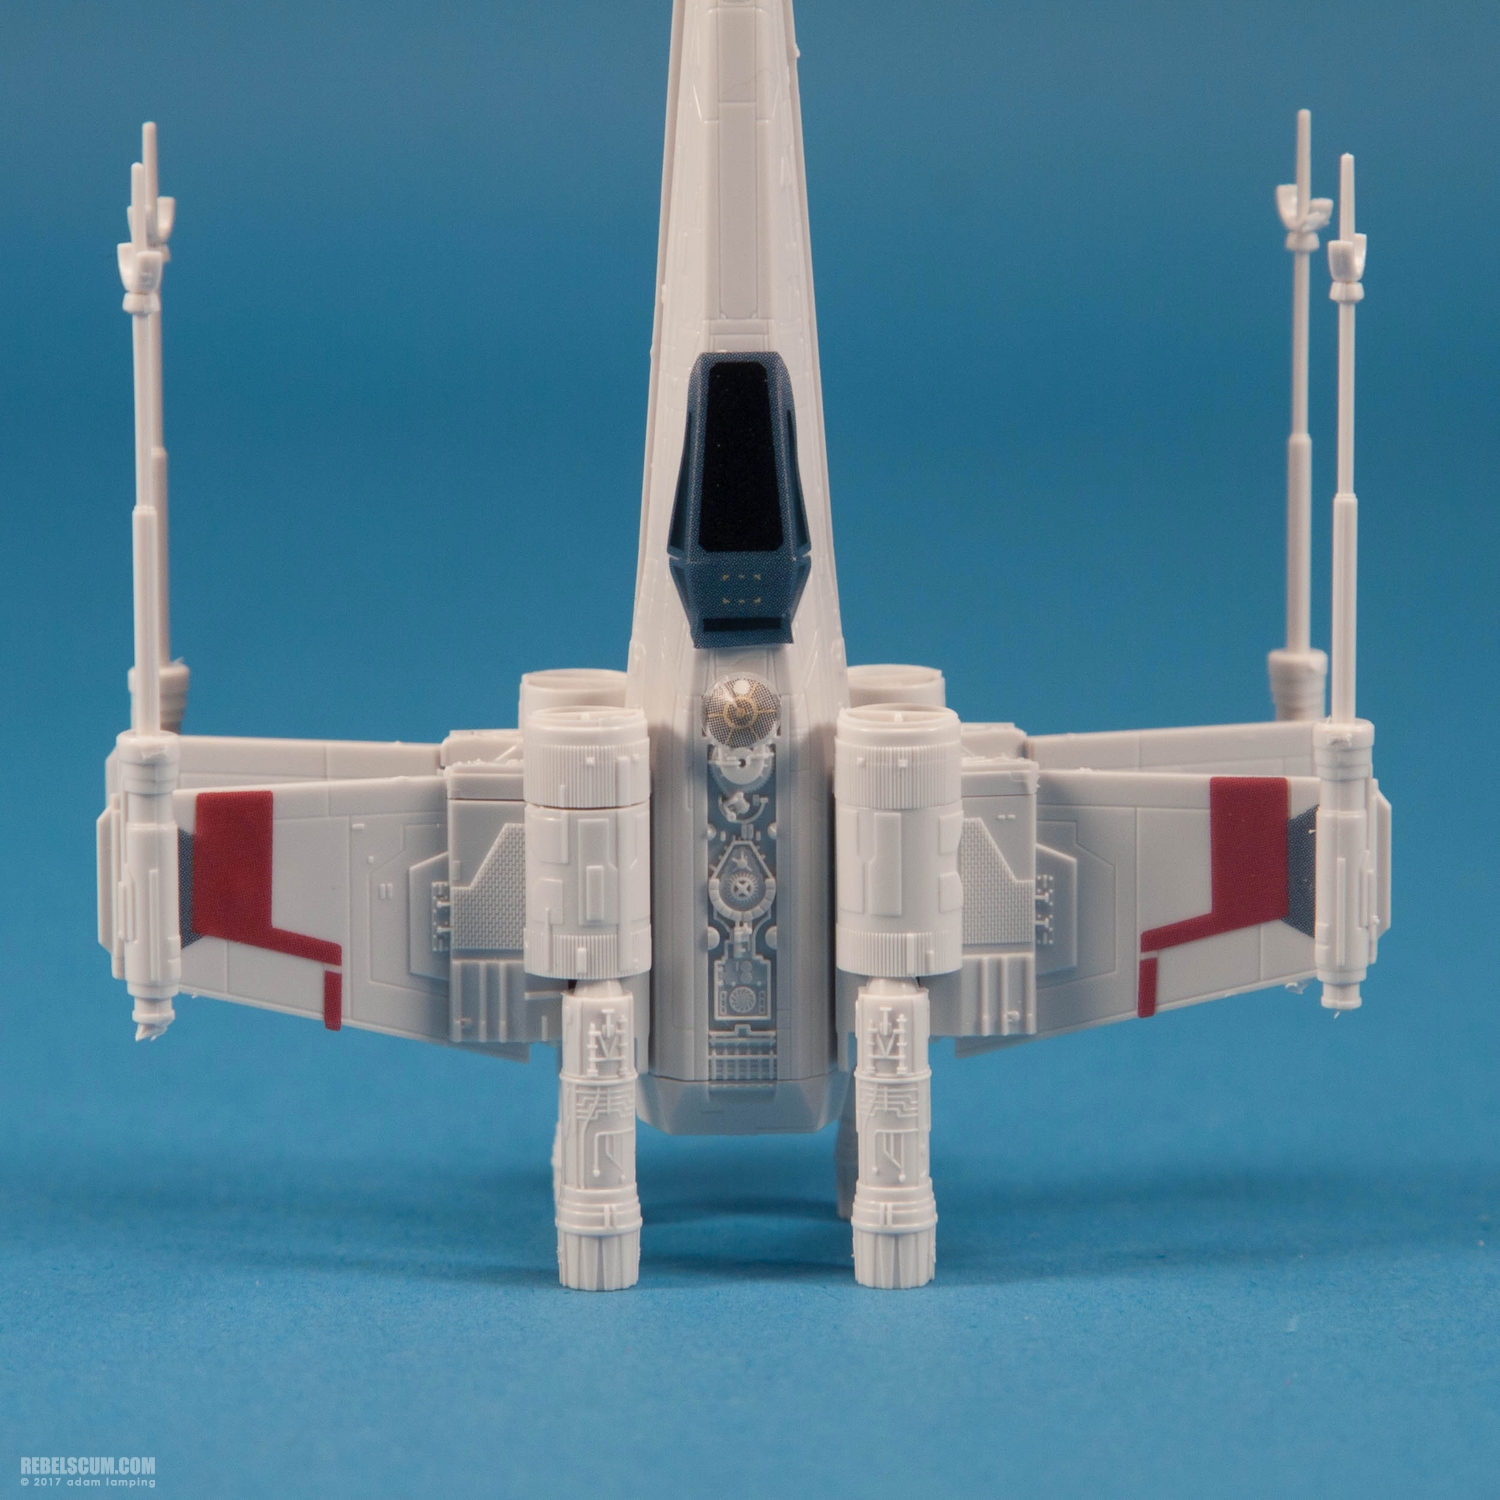 bandai-red-squadron-x-wing-starfighter-scale-model-kit-023.jpg